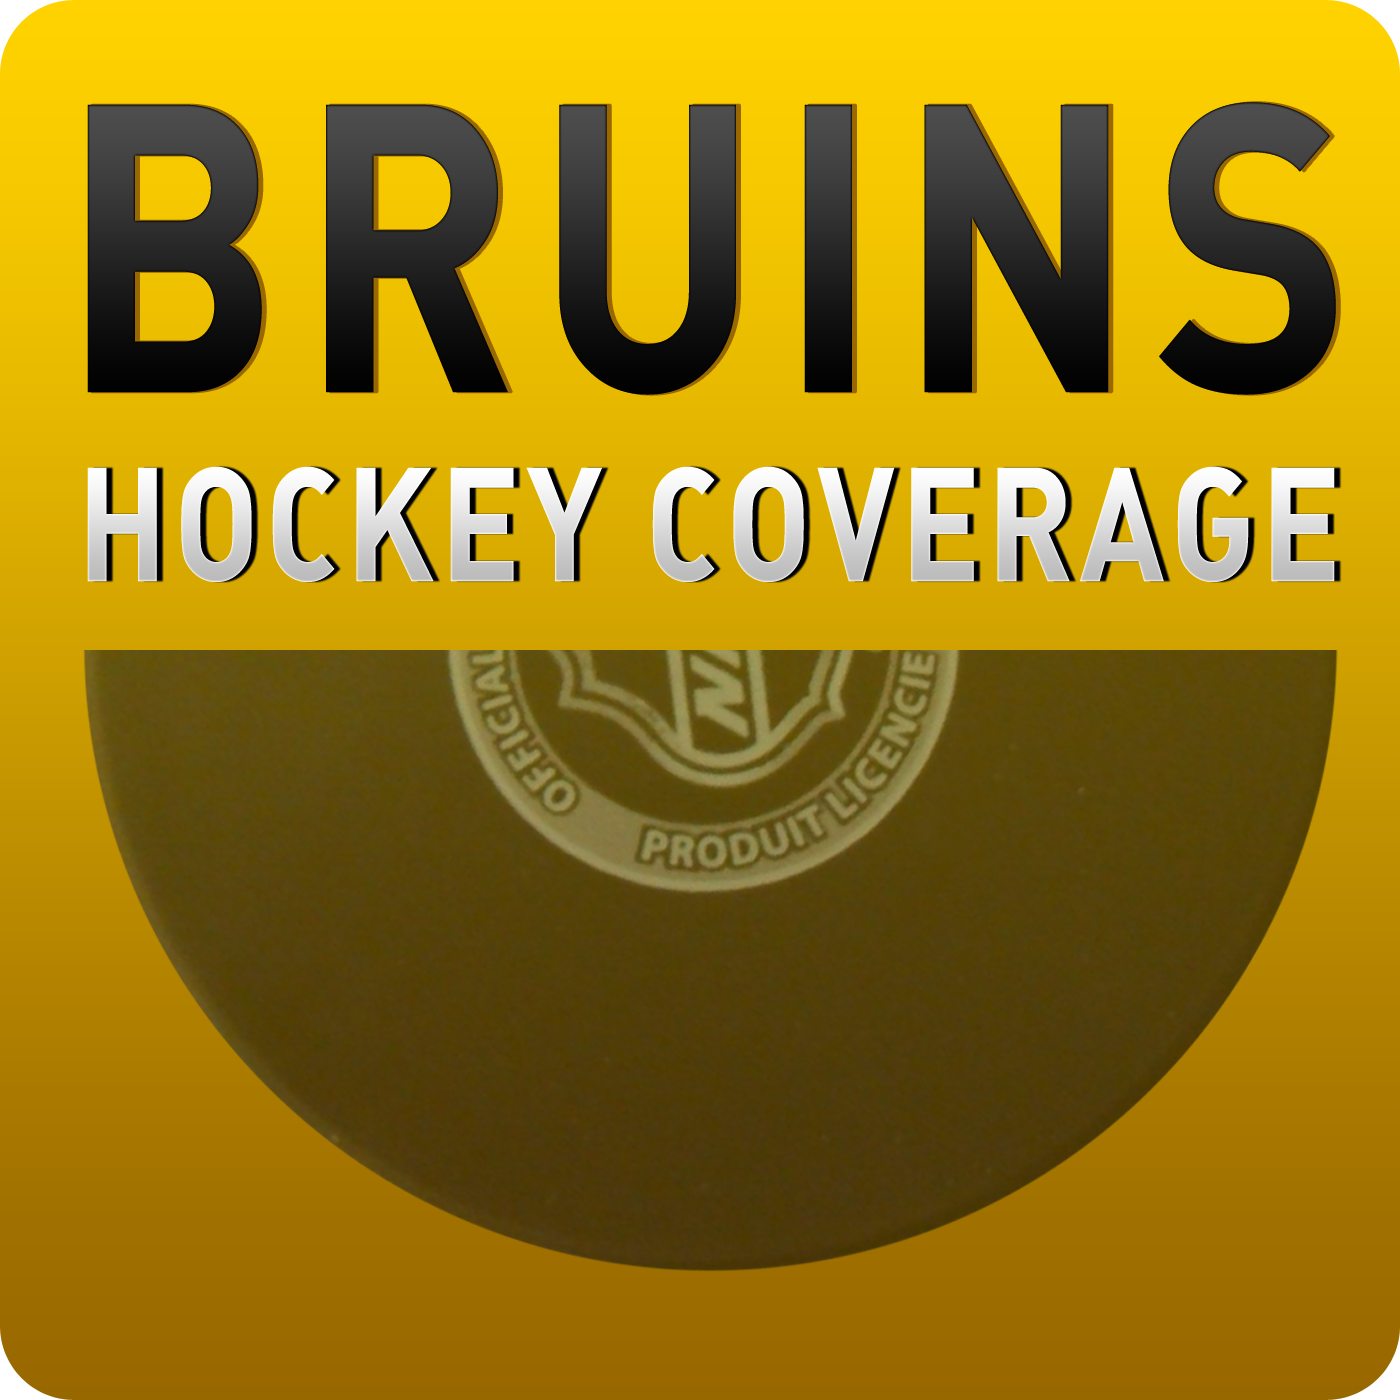 Sunday Skate at Night - Team Black SMOKES Team White in the Bruins' intra-squad scrimmage and everything that could possibly mean for the Stanley Cup Final 5-23-19